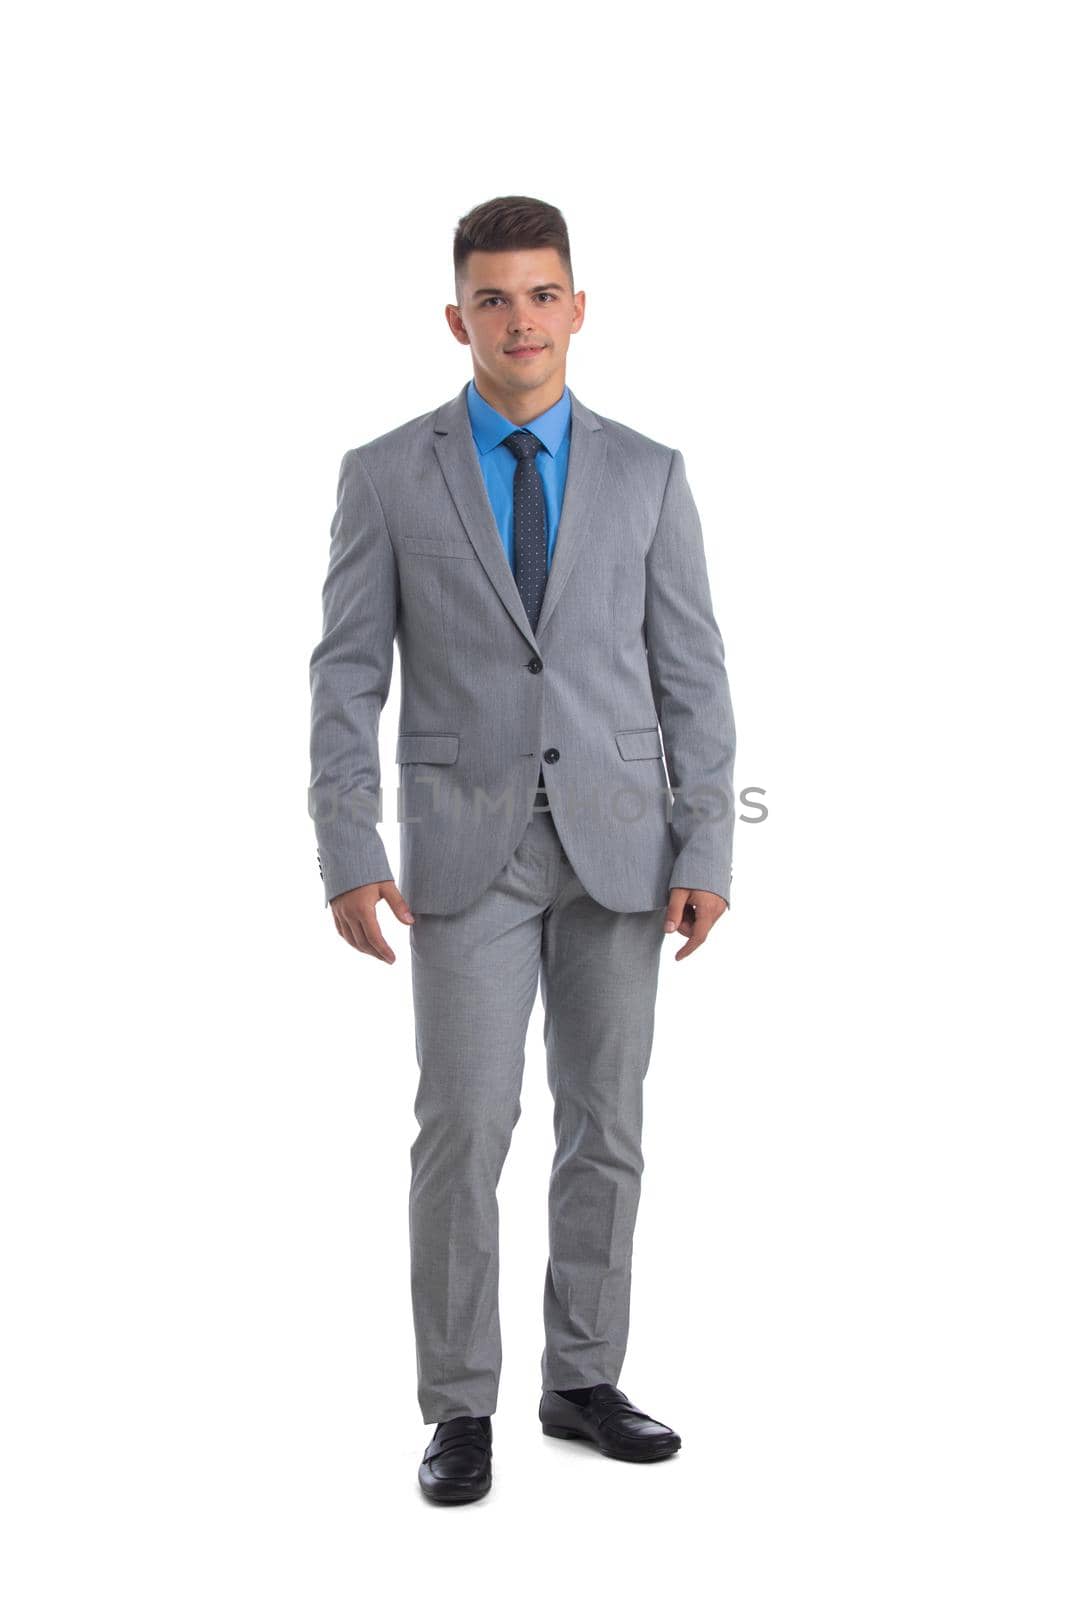 Young business man in a suit by ALotOfPeople